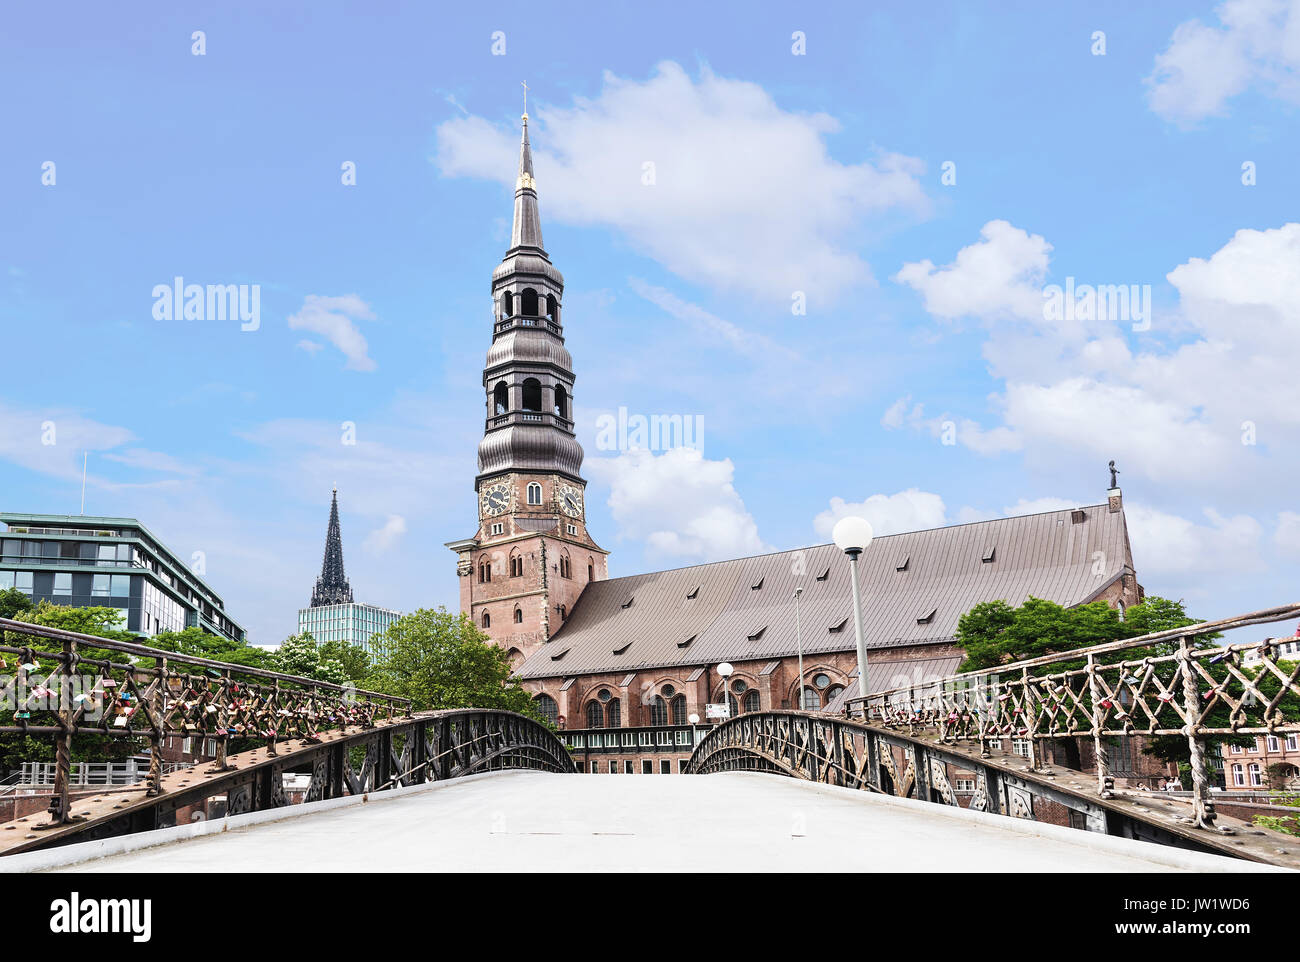 low angle shot of Sankt Katharinen church in Hamburg, Germany as seen from opposite side of Zollkanal channel Stock Photo